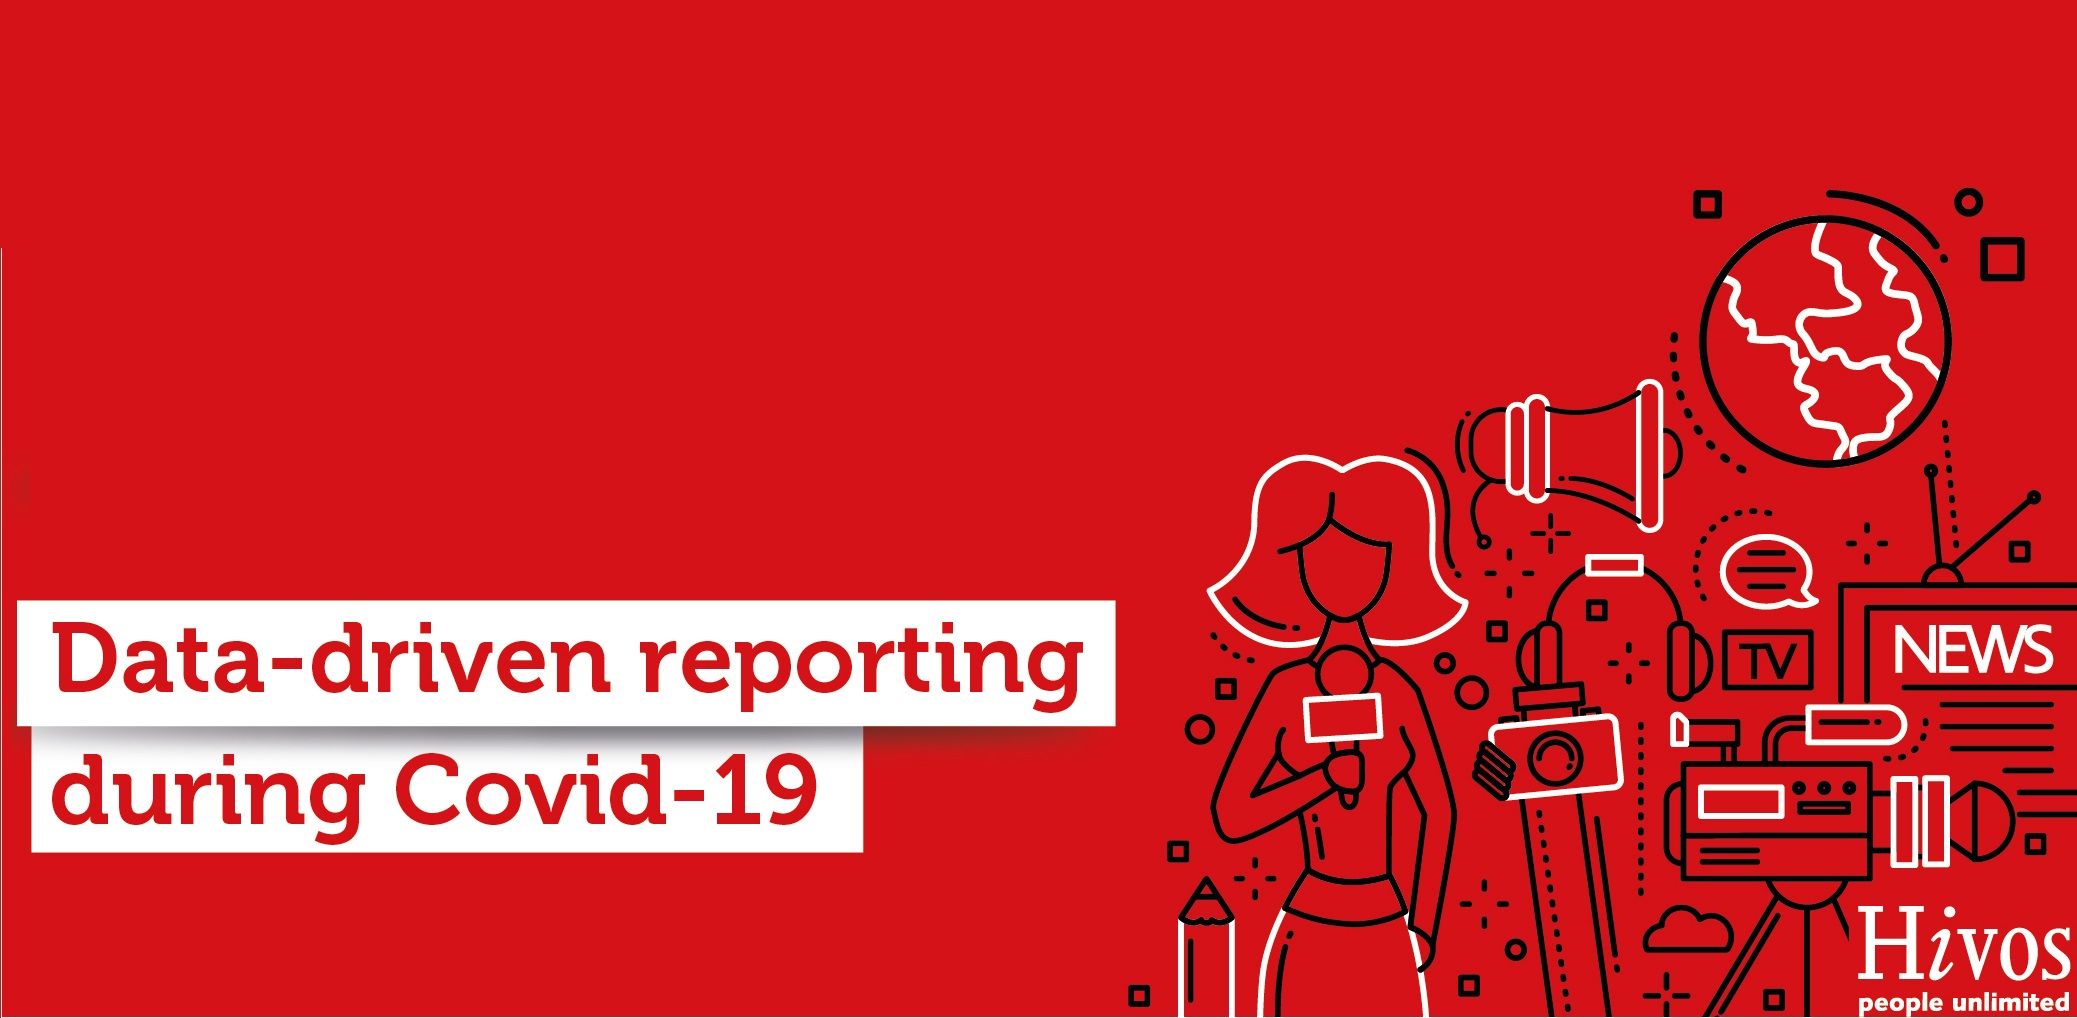 Data-driven reporting during Covid-19: Join us on 4 May for a conversation